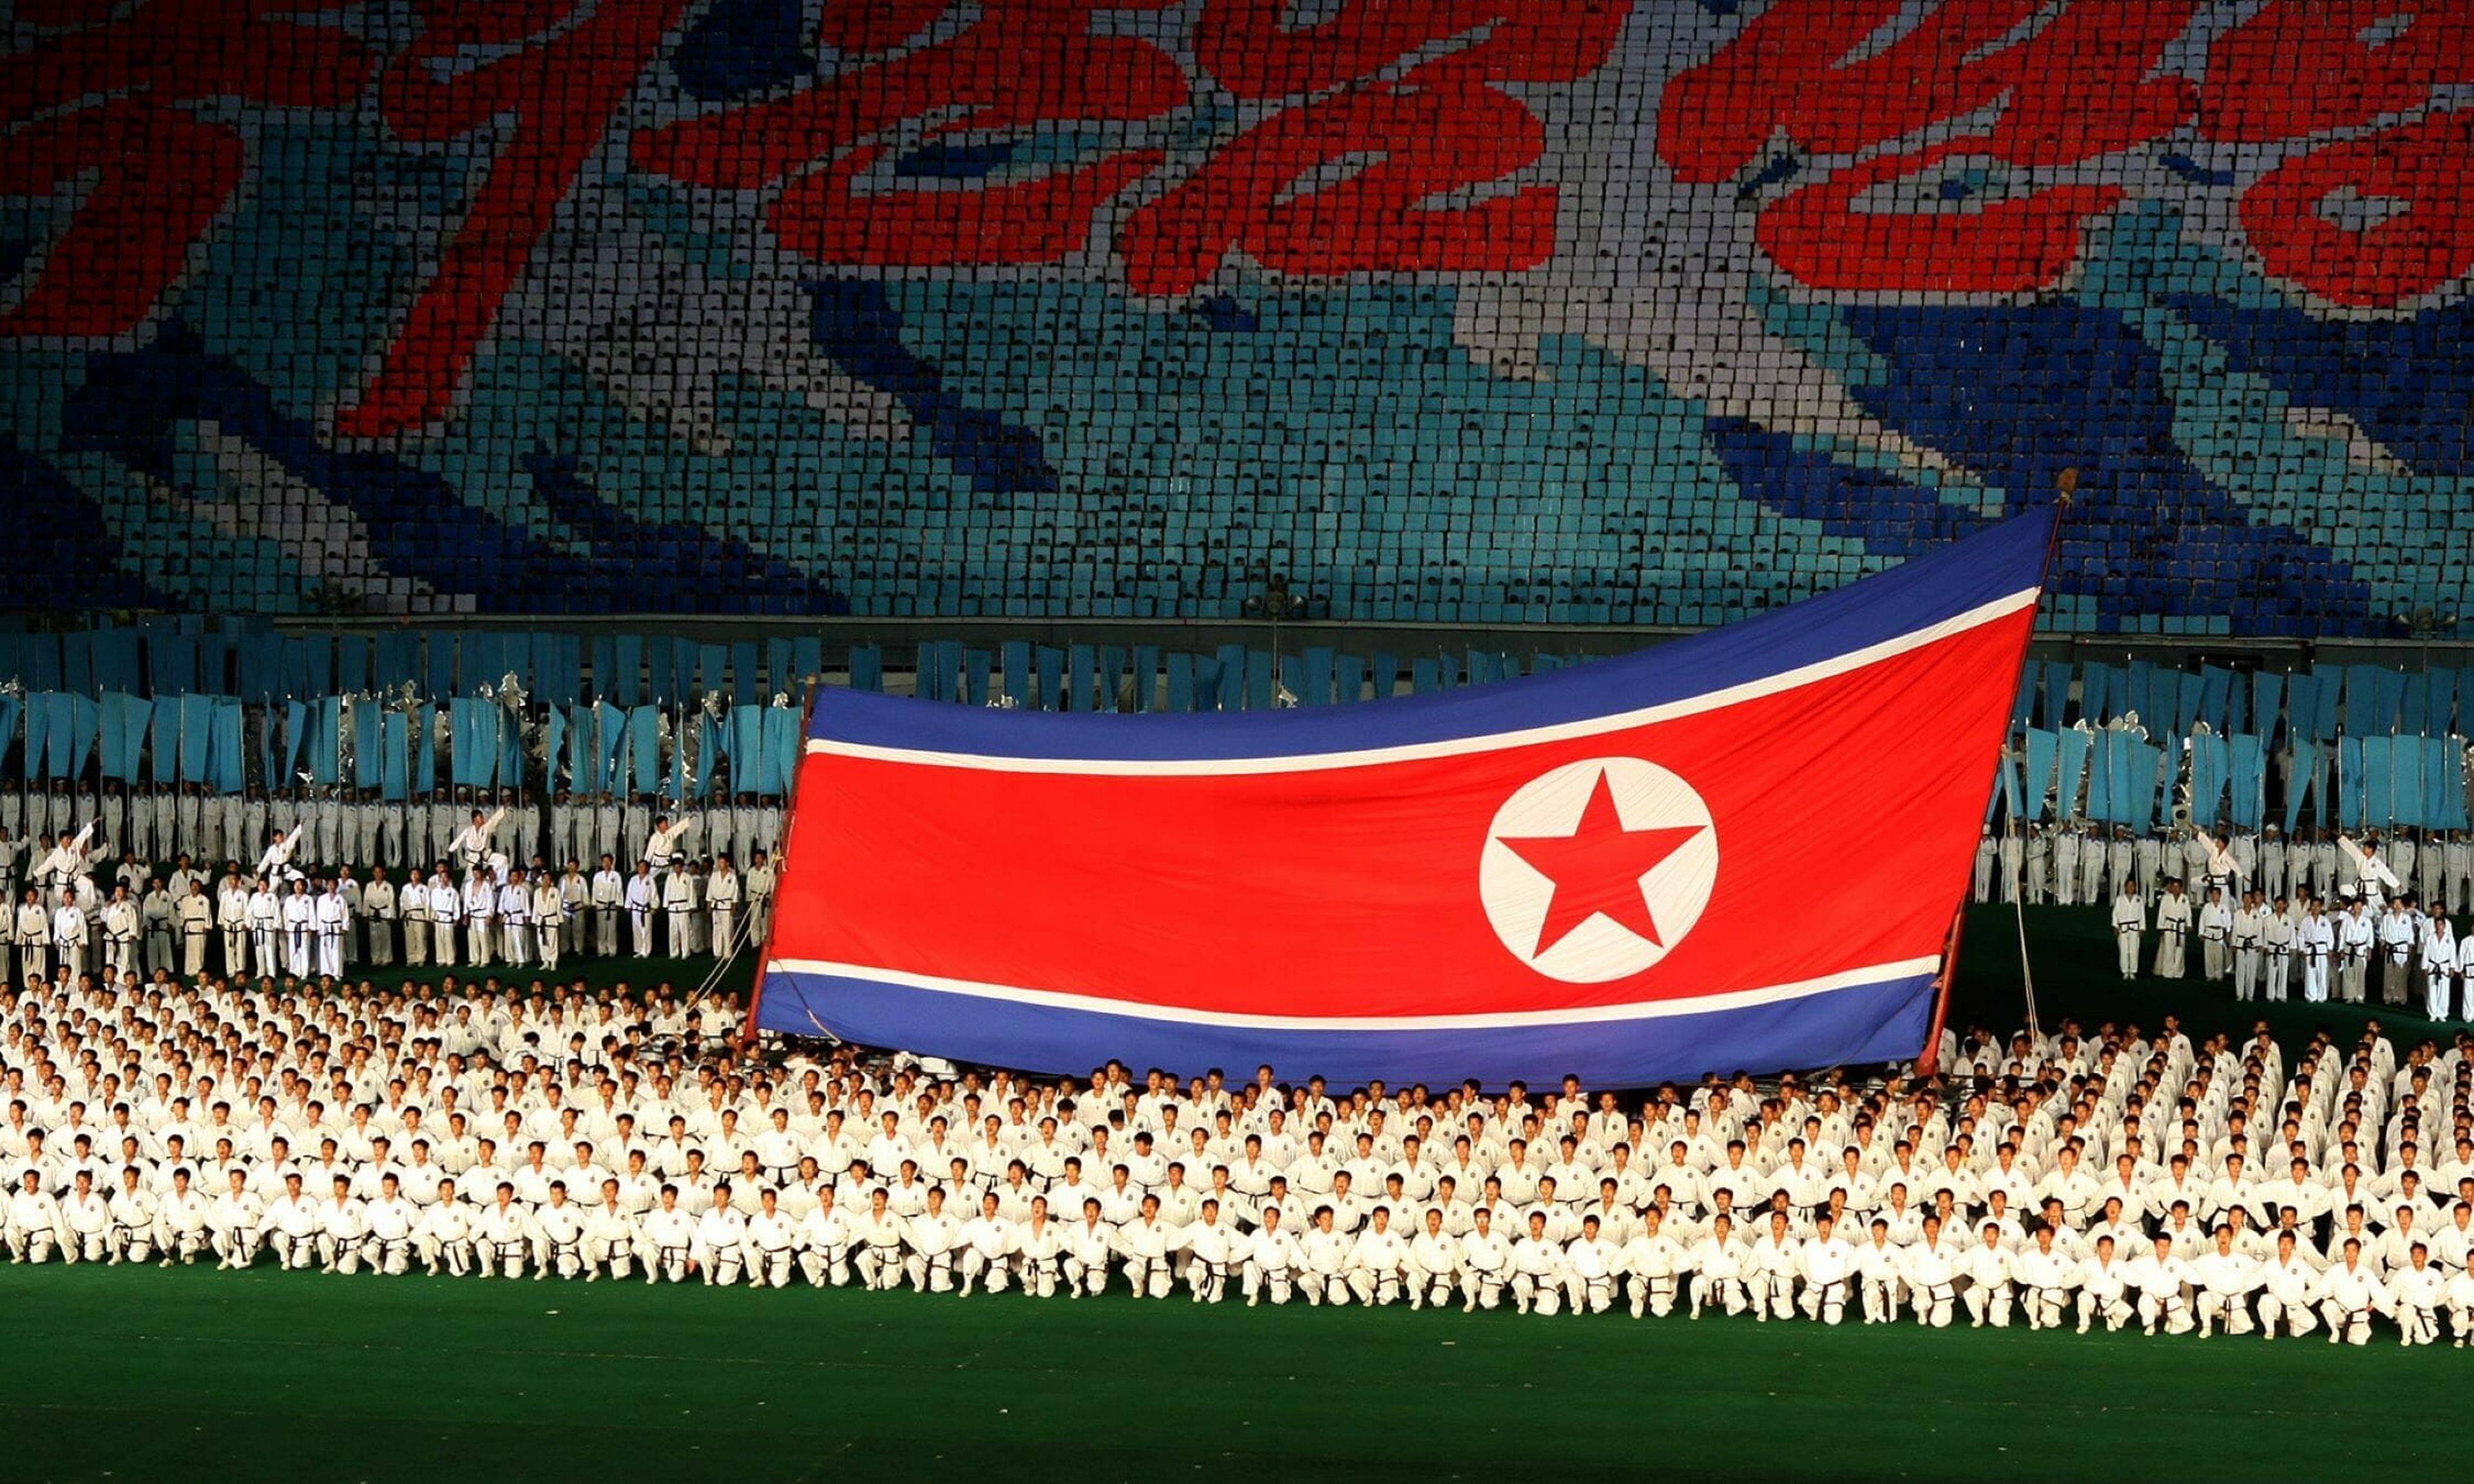 &#8220;North Korea &#8211; Flag&#8221; The federal government issued an advisory that the Kimsuky APT group  tasked by the North Korean regime with a global intelligence-gathering mission. Photo by Roman Harak is licensed under CC BY-SA 2.0